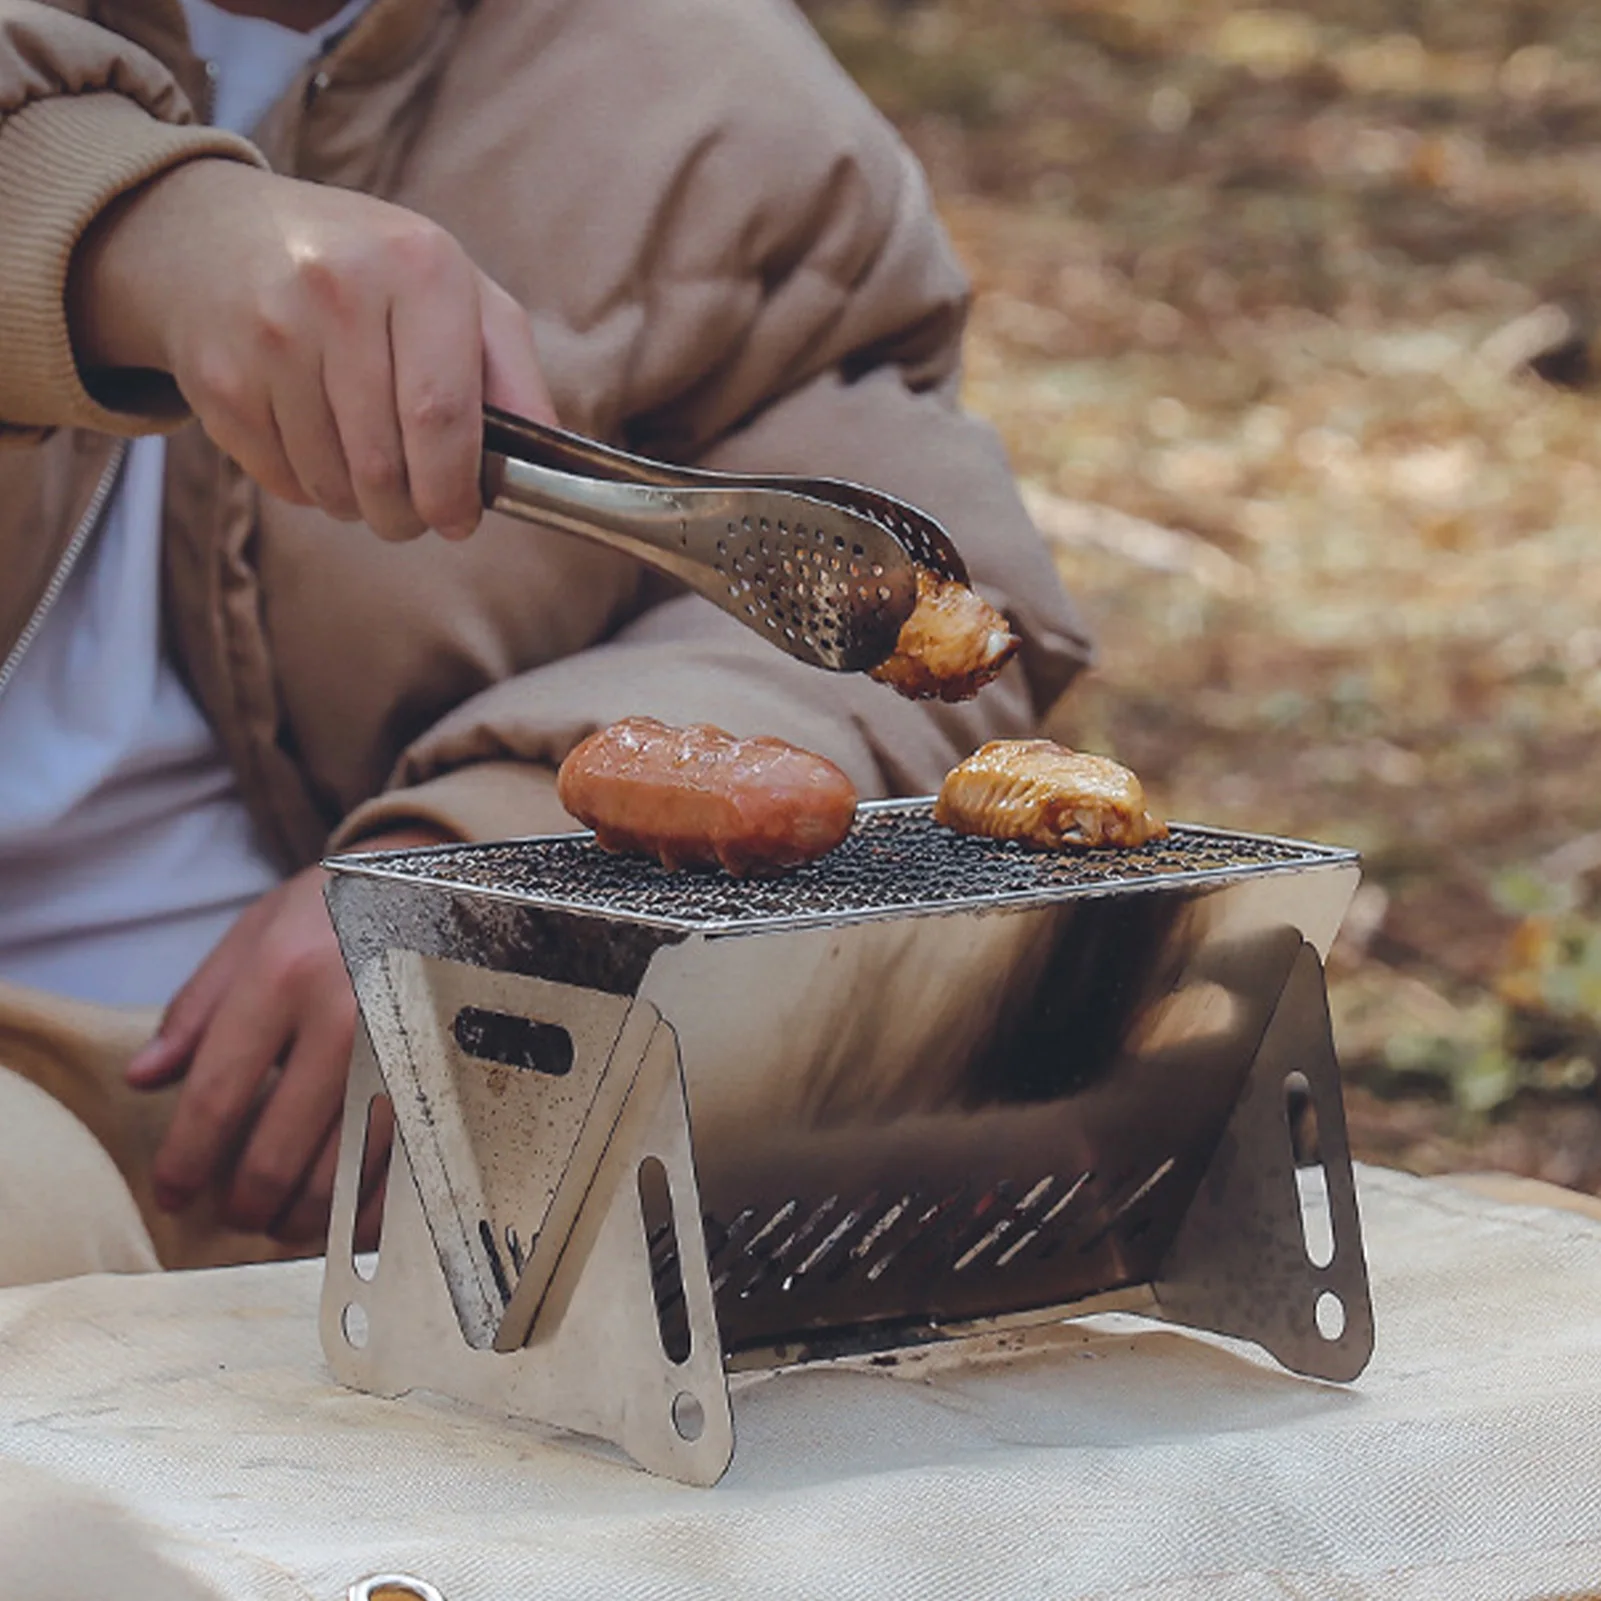 

Portable Camping Wood Stove Wood Burning Stove Stainless Steel Outdoor Folding Stoves For Backpacking Survival Cooking Picnic